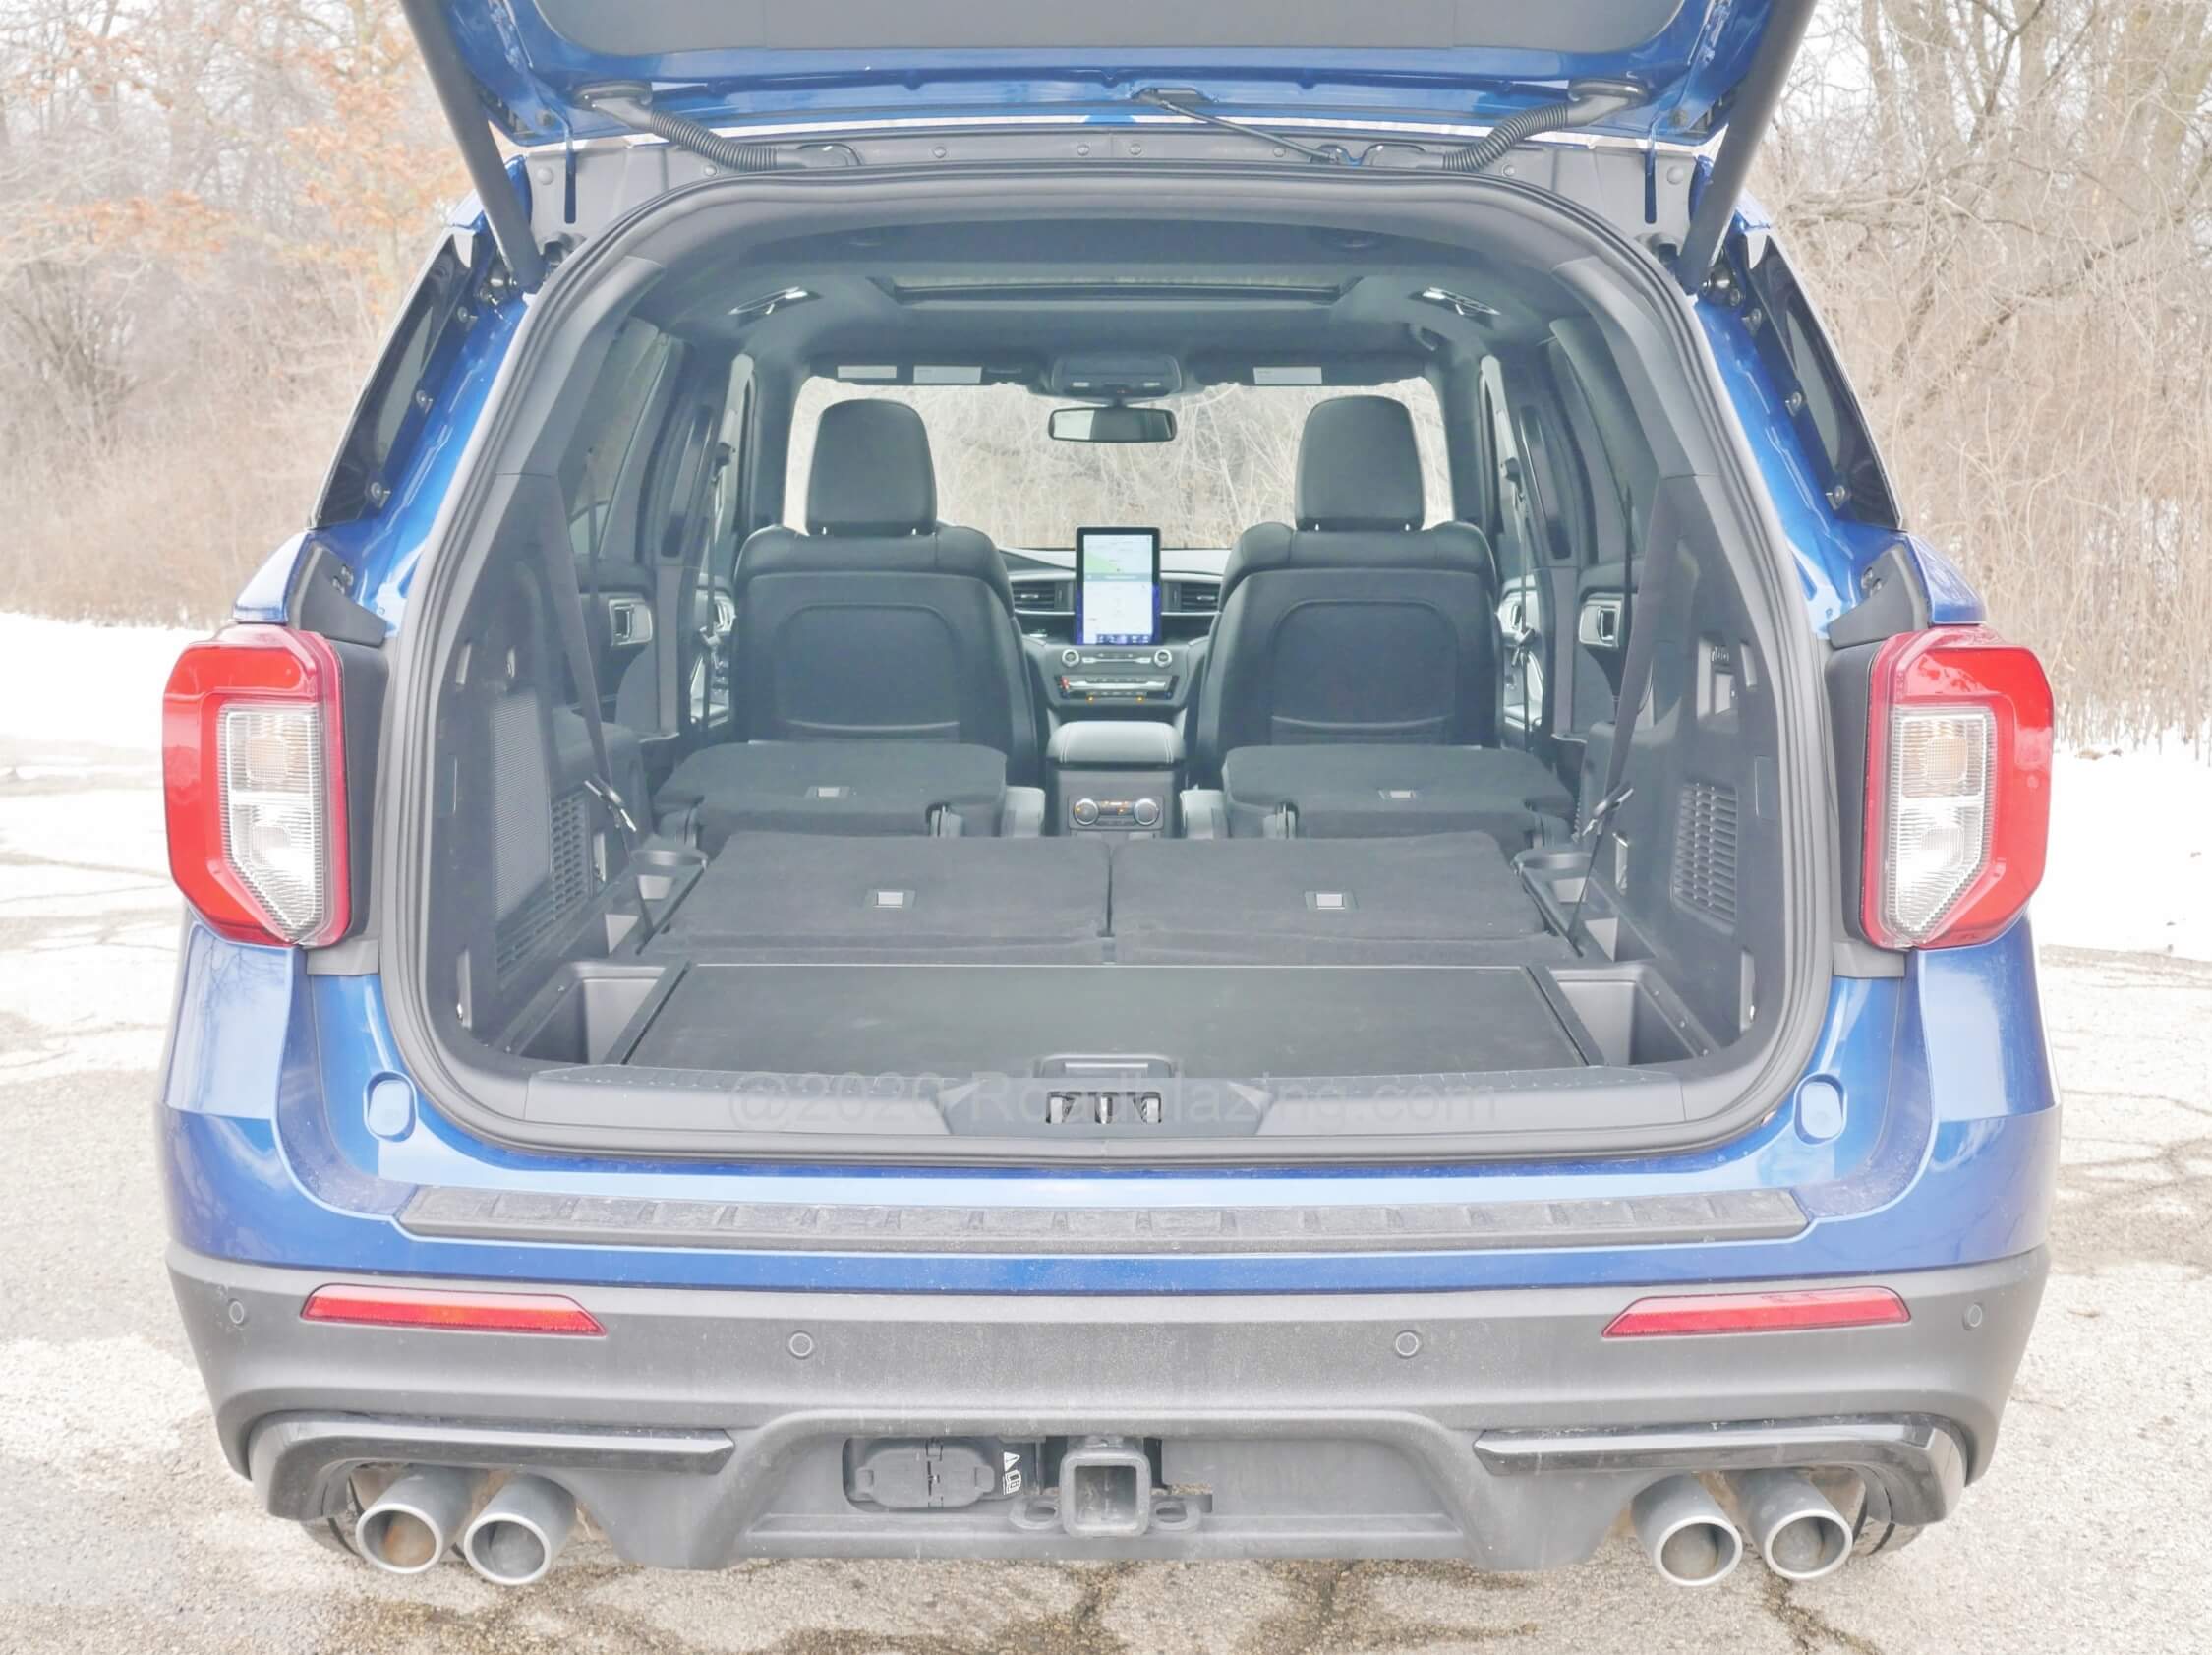 2020 Ford Explorer ST: cargo capacity with Rows 2 and 3 folded